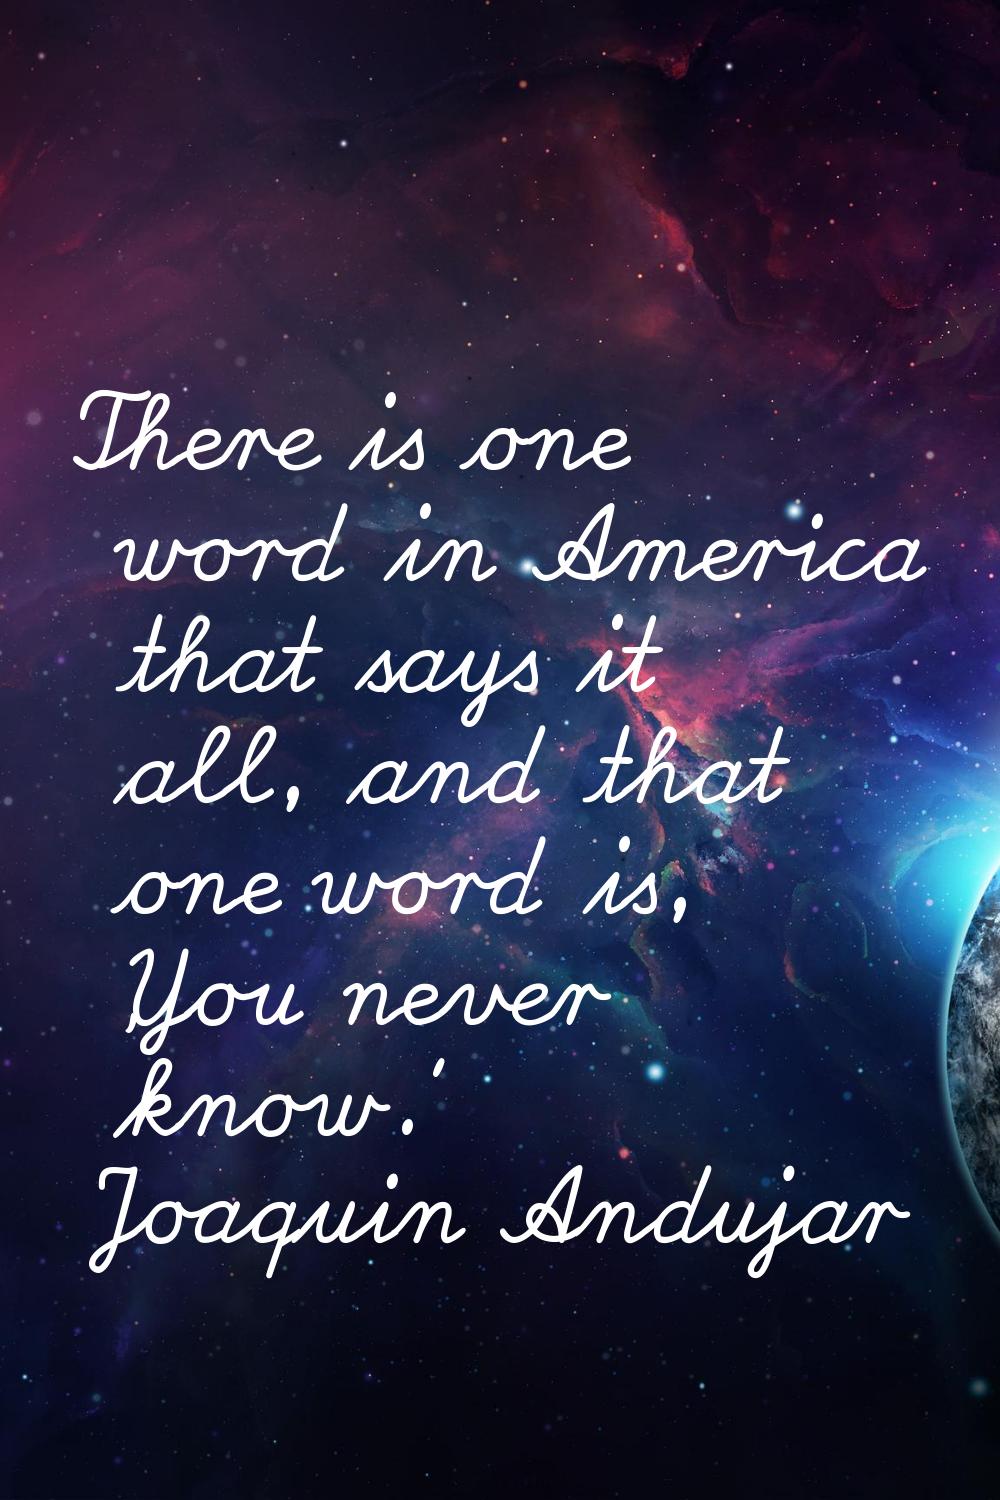 There is one word in America that says it all, and that one word is, 'You never know.'